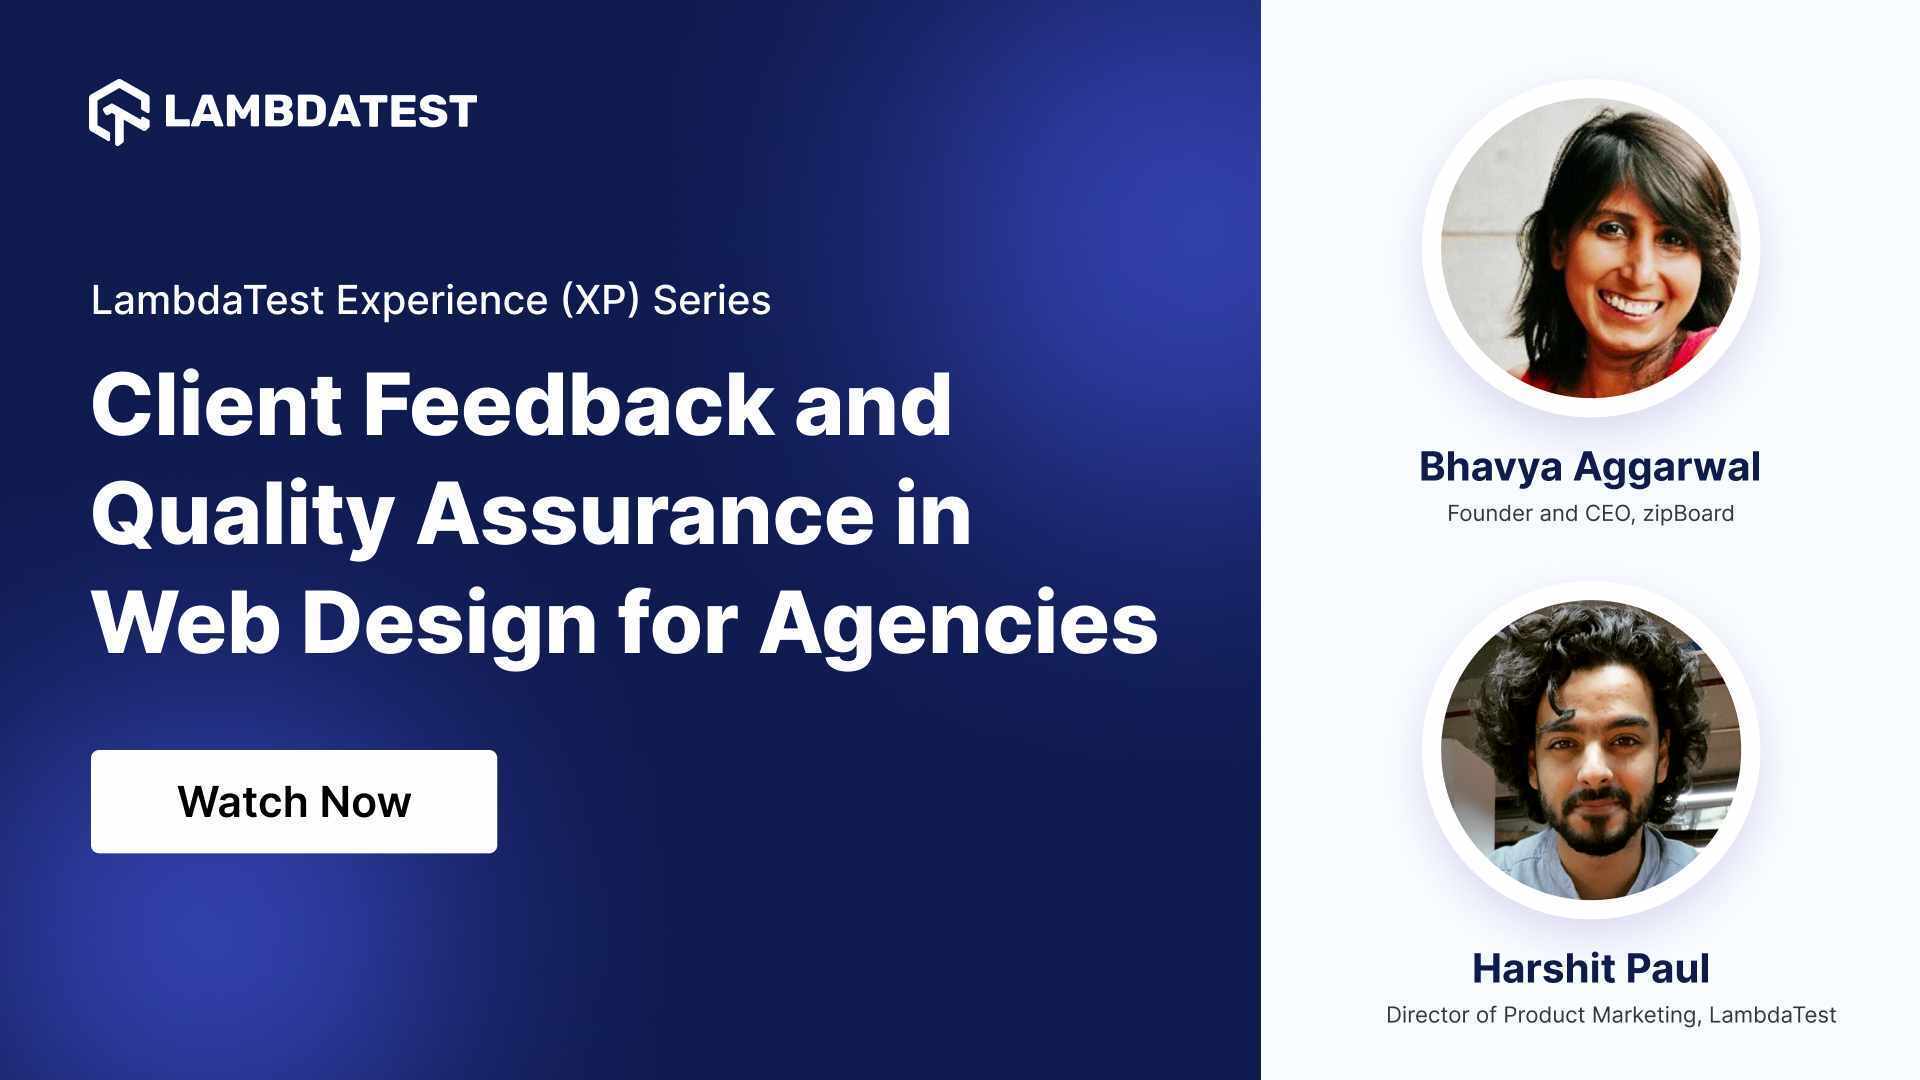 Client Feedback & Quality Assurance in Web Design for Agencies